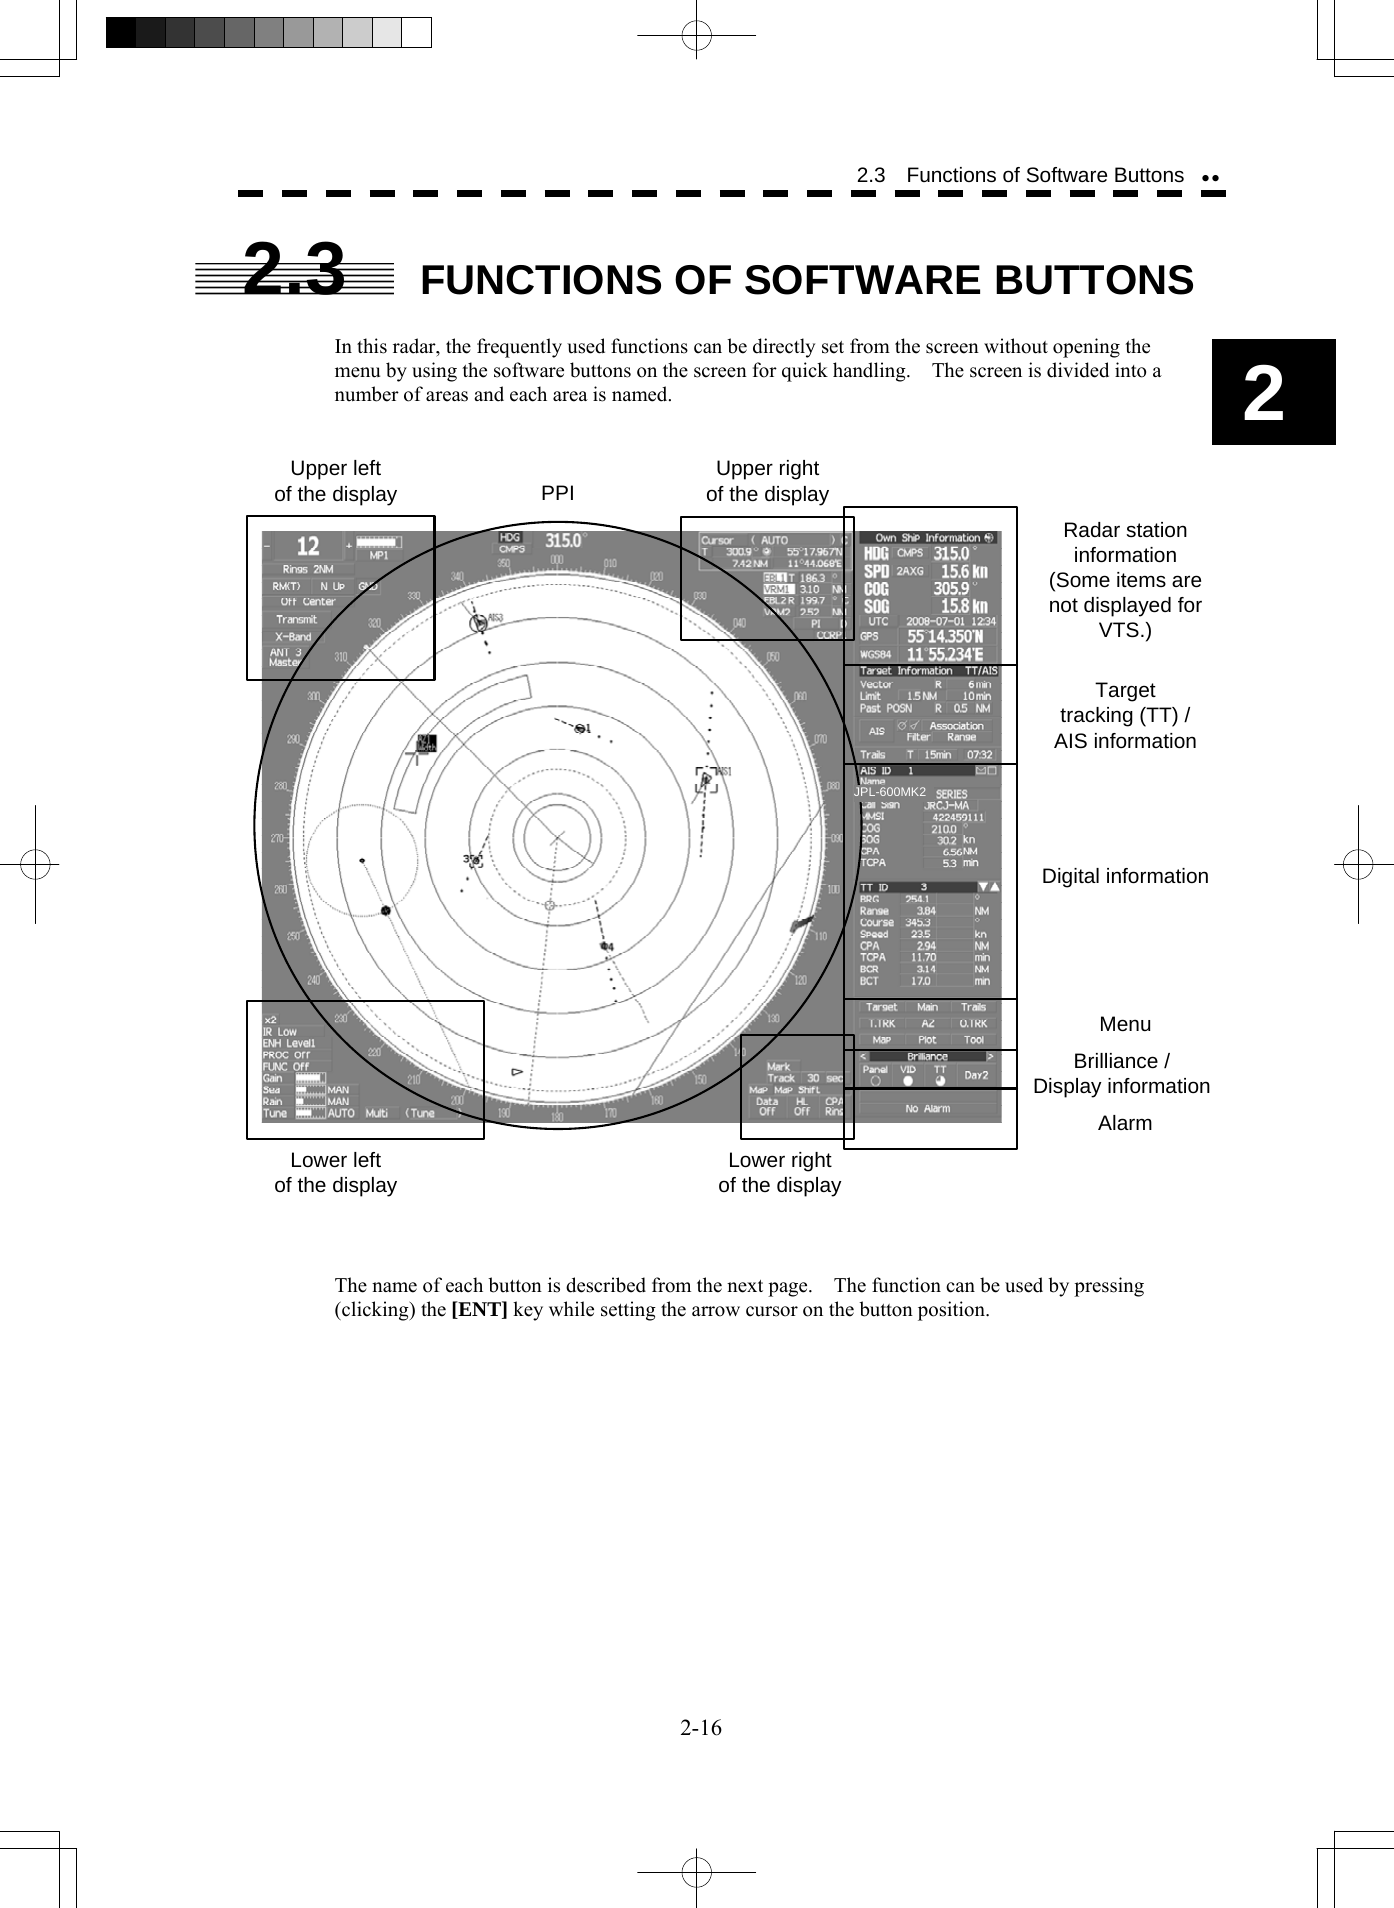  2-16 2 2.3    Functions of Software Buttons yy2.3  FUNCTIONS OF SOFTWARE BUTTONS  In this radar, the frequently used functions can be directly set from the screen without opening the menu by using the software buttons on the screen for quick handling.    The screen is divided into a number of areas and each area is named.   PPIUpper leftof the displayLower leftof the displayUpper rightof the displayLower rightof the displayRadar station information(Some items are not displayed for VTS.)Digital informationTargettracking (TT) /AIS informationMenuBrilliance /Display informationAlarm   The name of each button is described from the next page.    The function can be used by pressing (clicking) the [ENT] key while setting the arrow cursor on the button position.    JPL-600MK2 